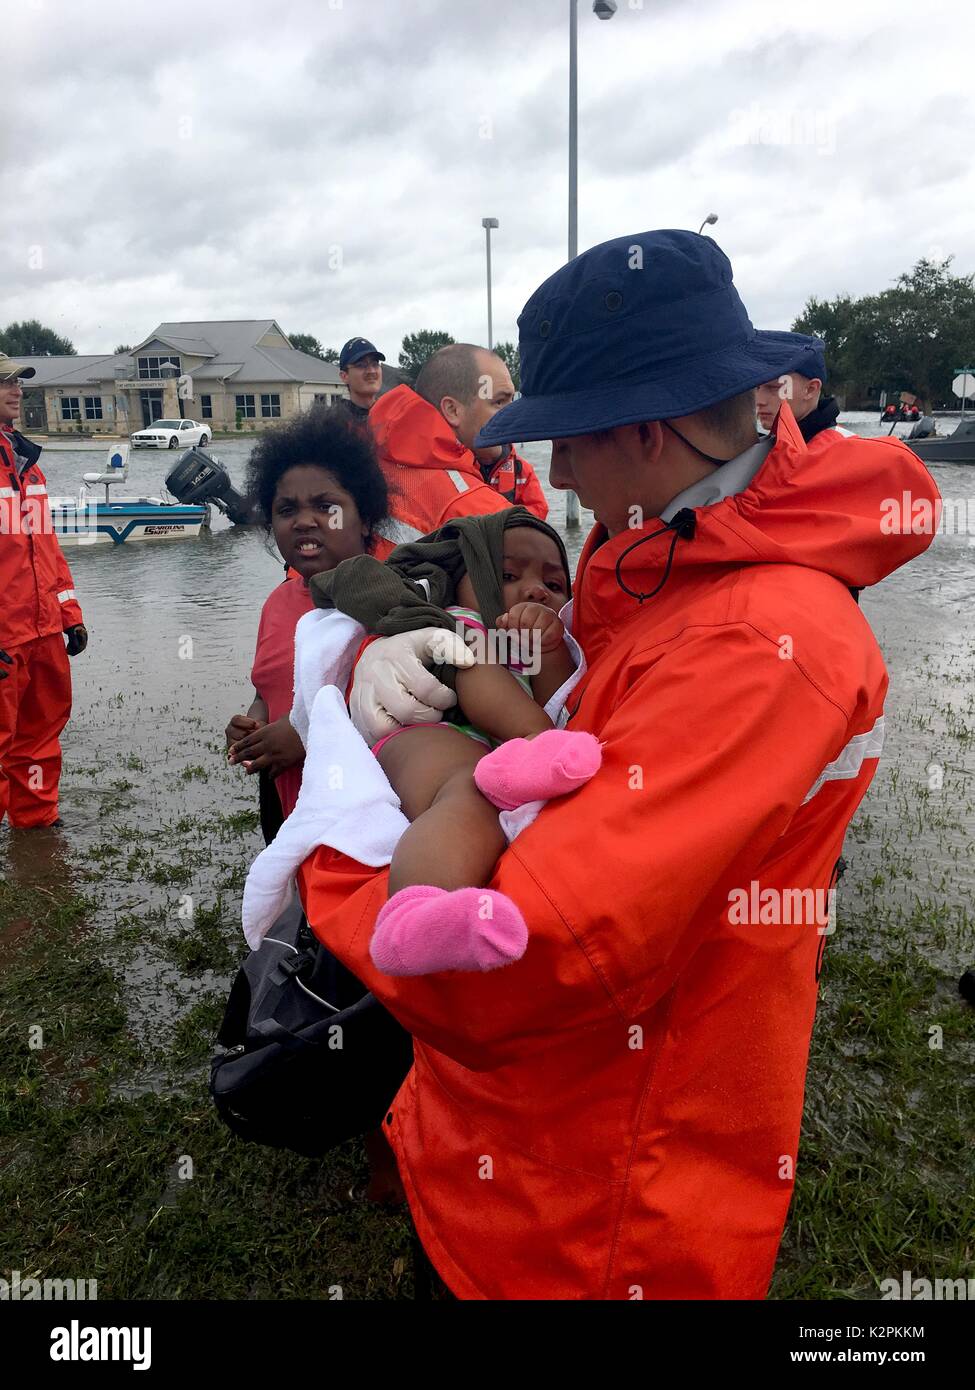 Port Arthur, United States. 30th Aug, 2017. U.S. Coast Guard Petty Officer 3rd Class Ryan Hicks rescues a child from flooding in the aftermath of Hurricane Harvey August 30, 2017 in Port Arthur, Texas. Credit: Planetpix/Alamy Live News Stock Photo